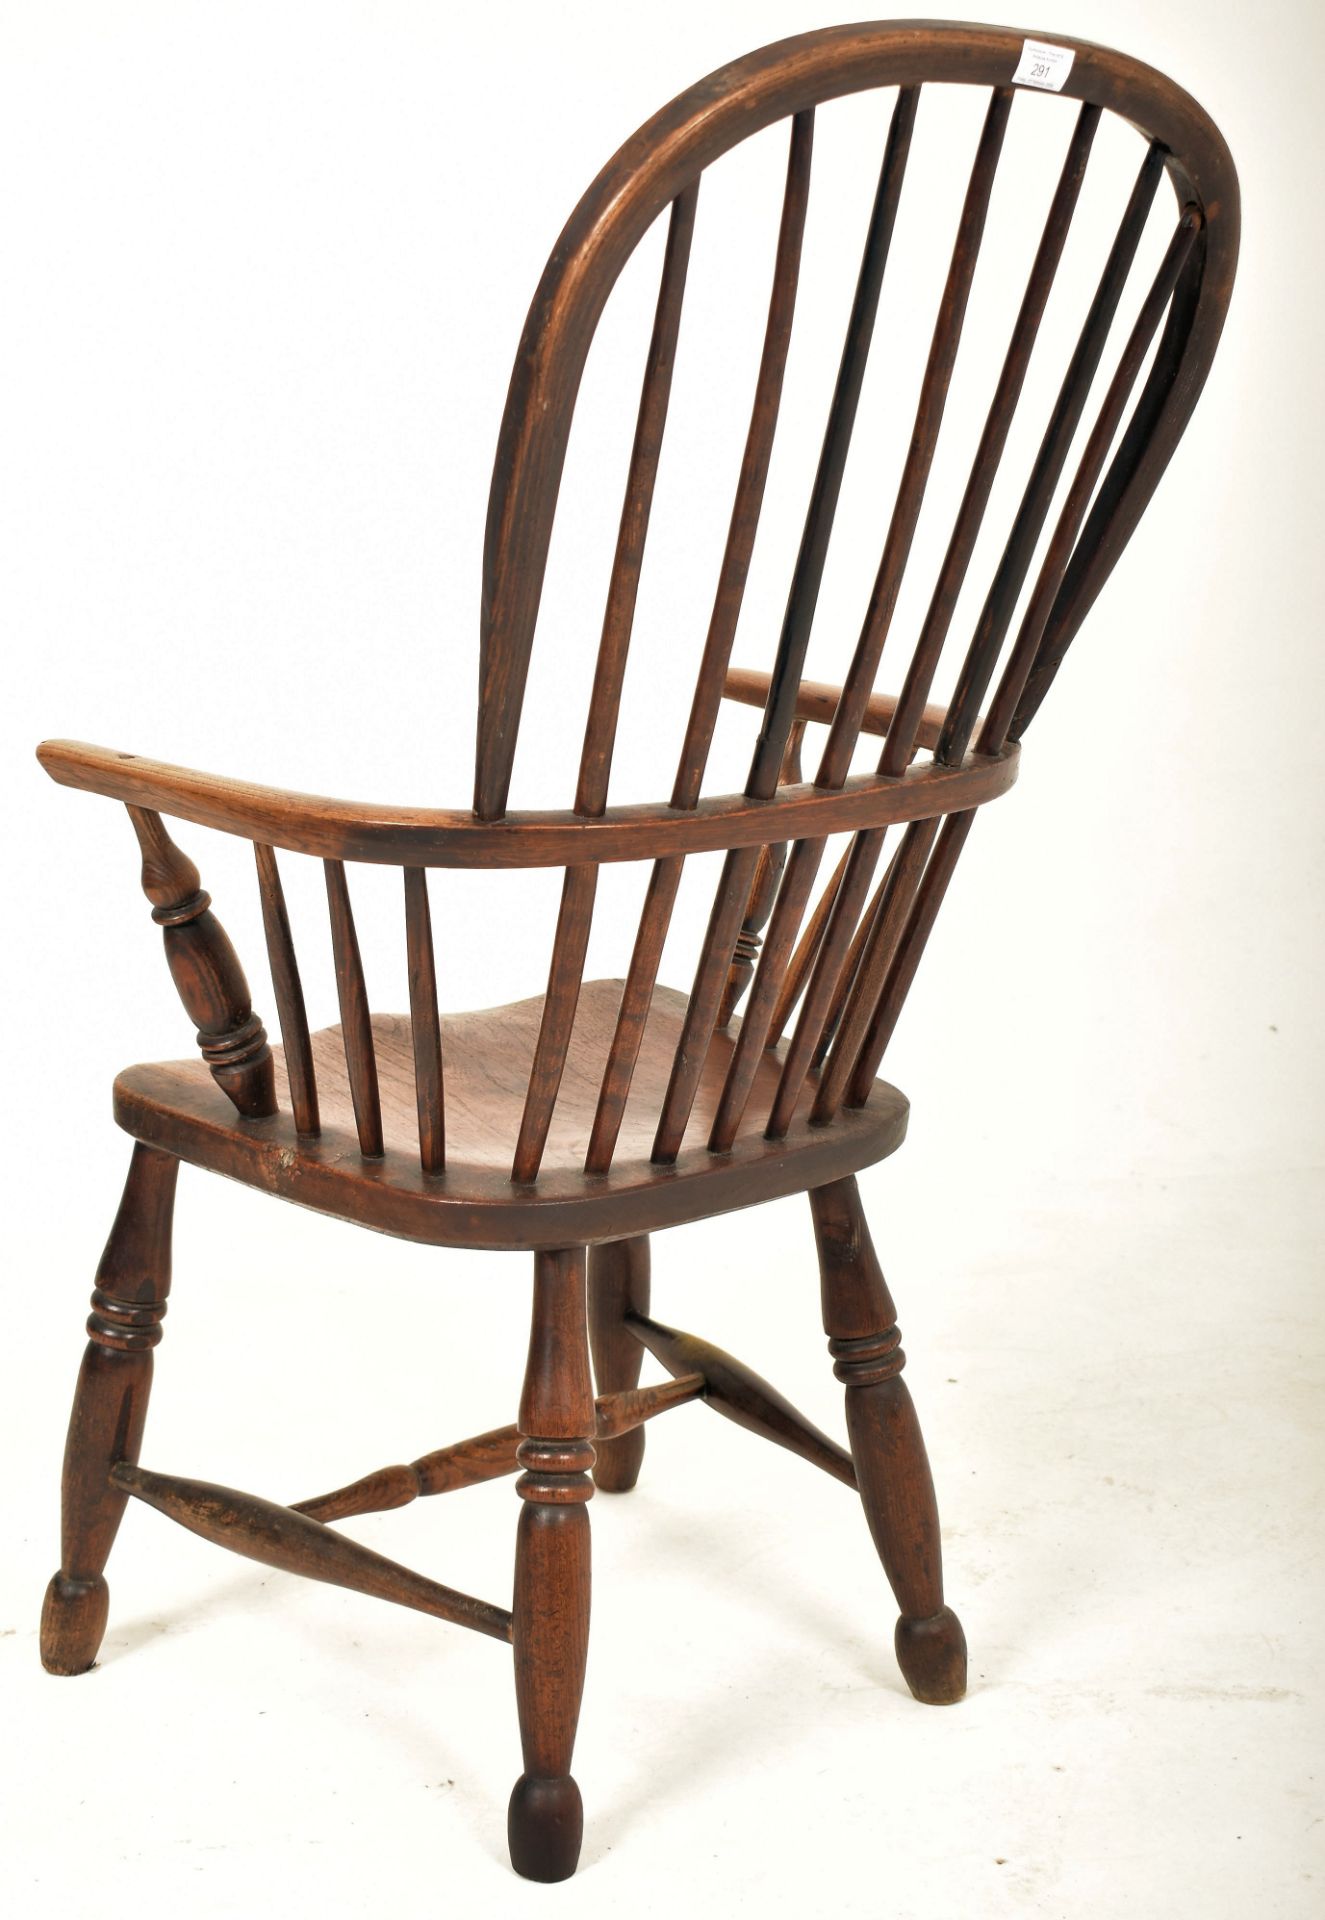 VICTORIAN 19TH CENTURY ELM COMB-BACK WINDSOR CHAIR - Image 5 of 5